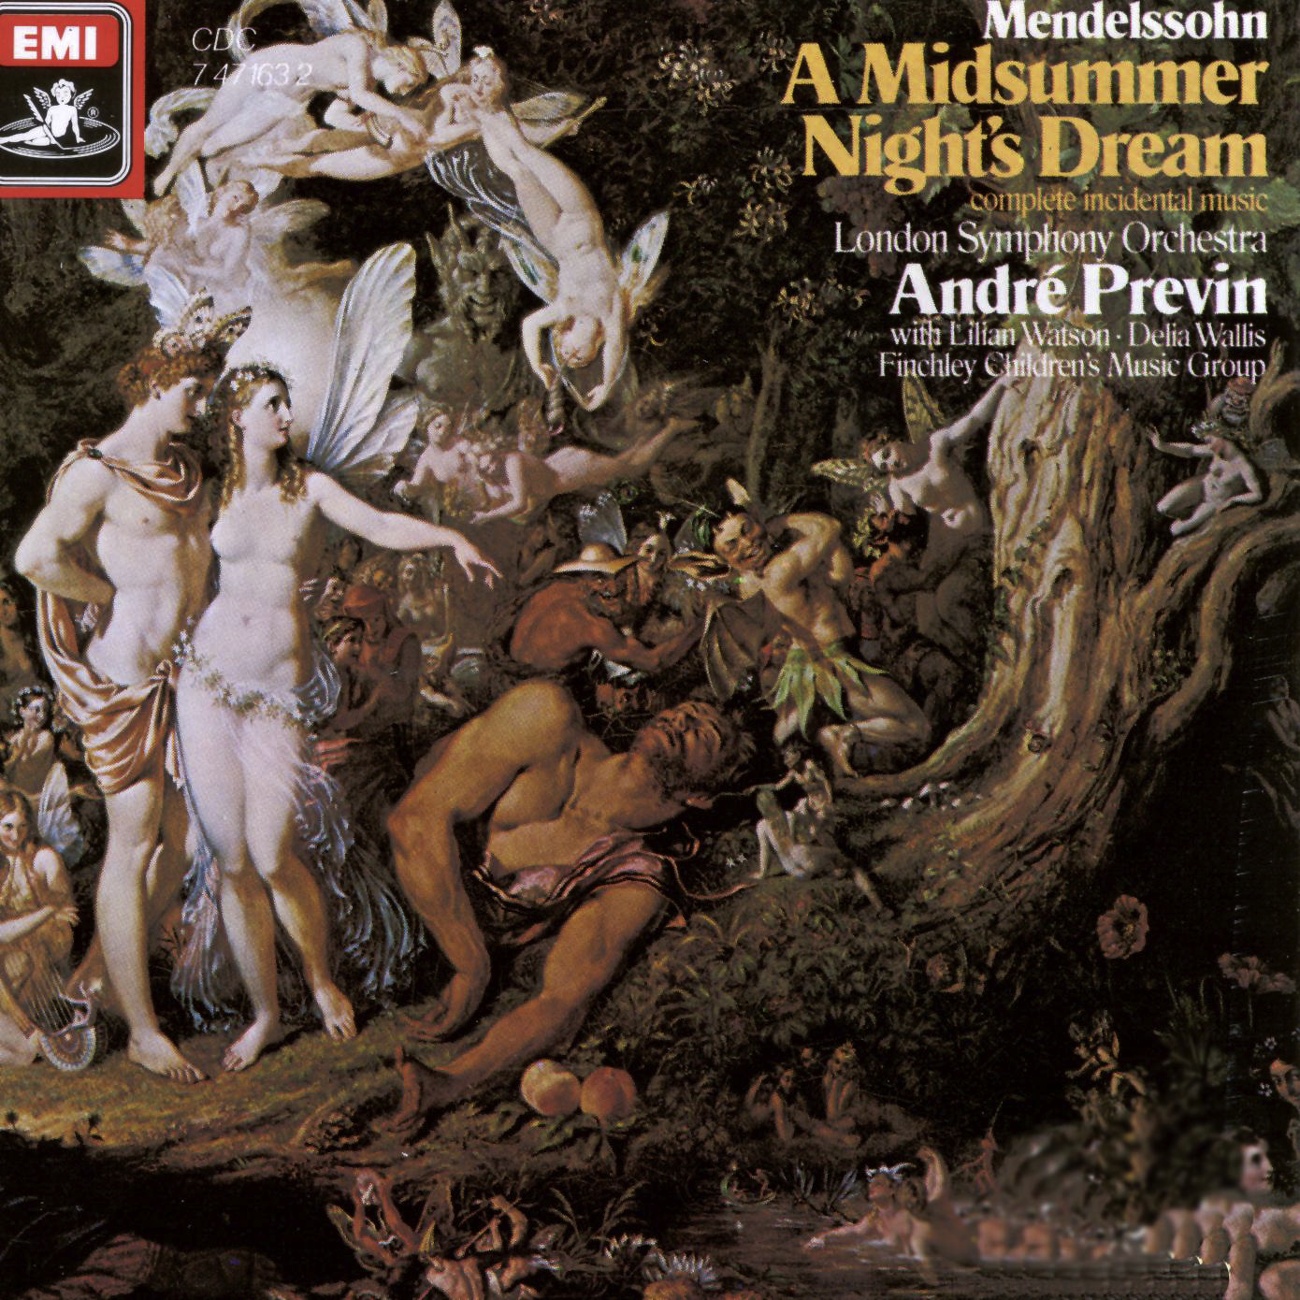 A Midsummer Night's Dream - incidental music Opp. 21 and 61 (1985 Digital Remaster): Wedding March_reprise (Act 5)